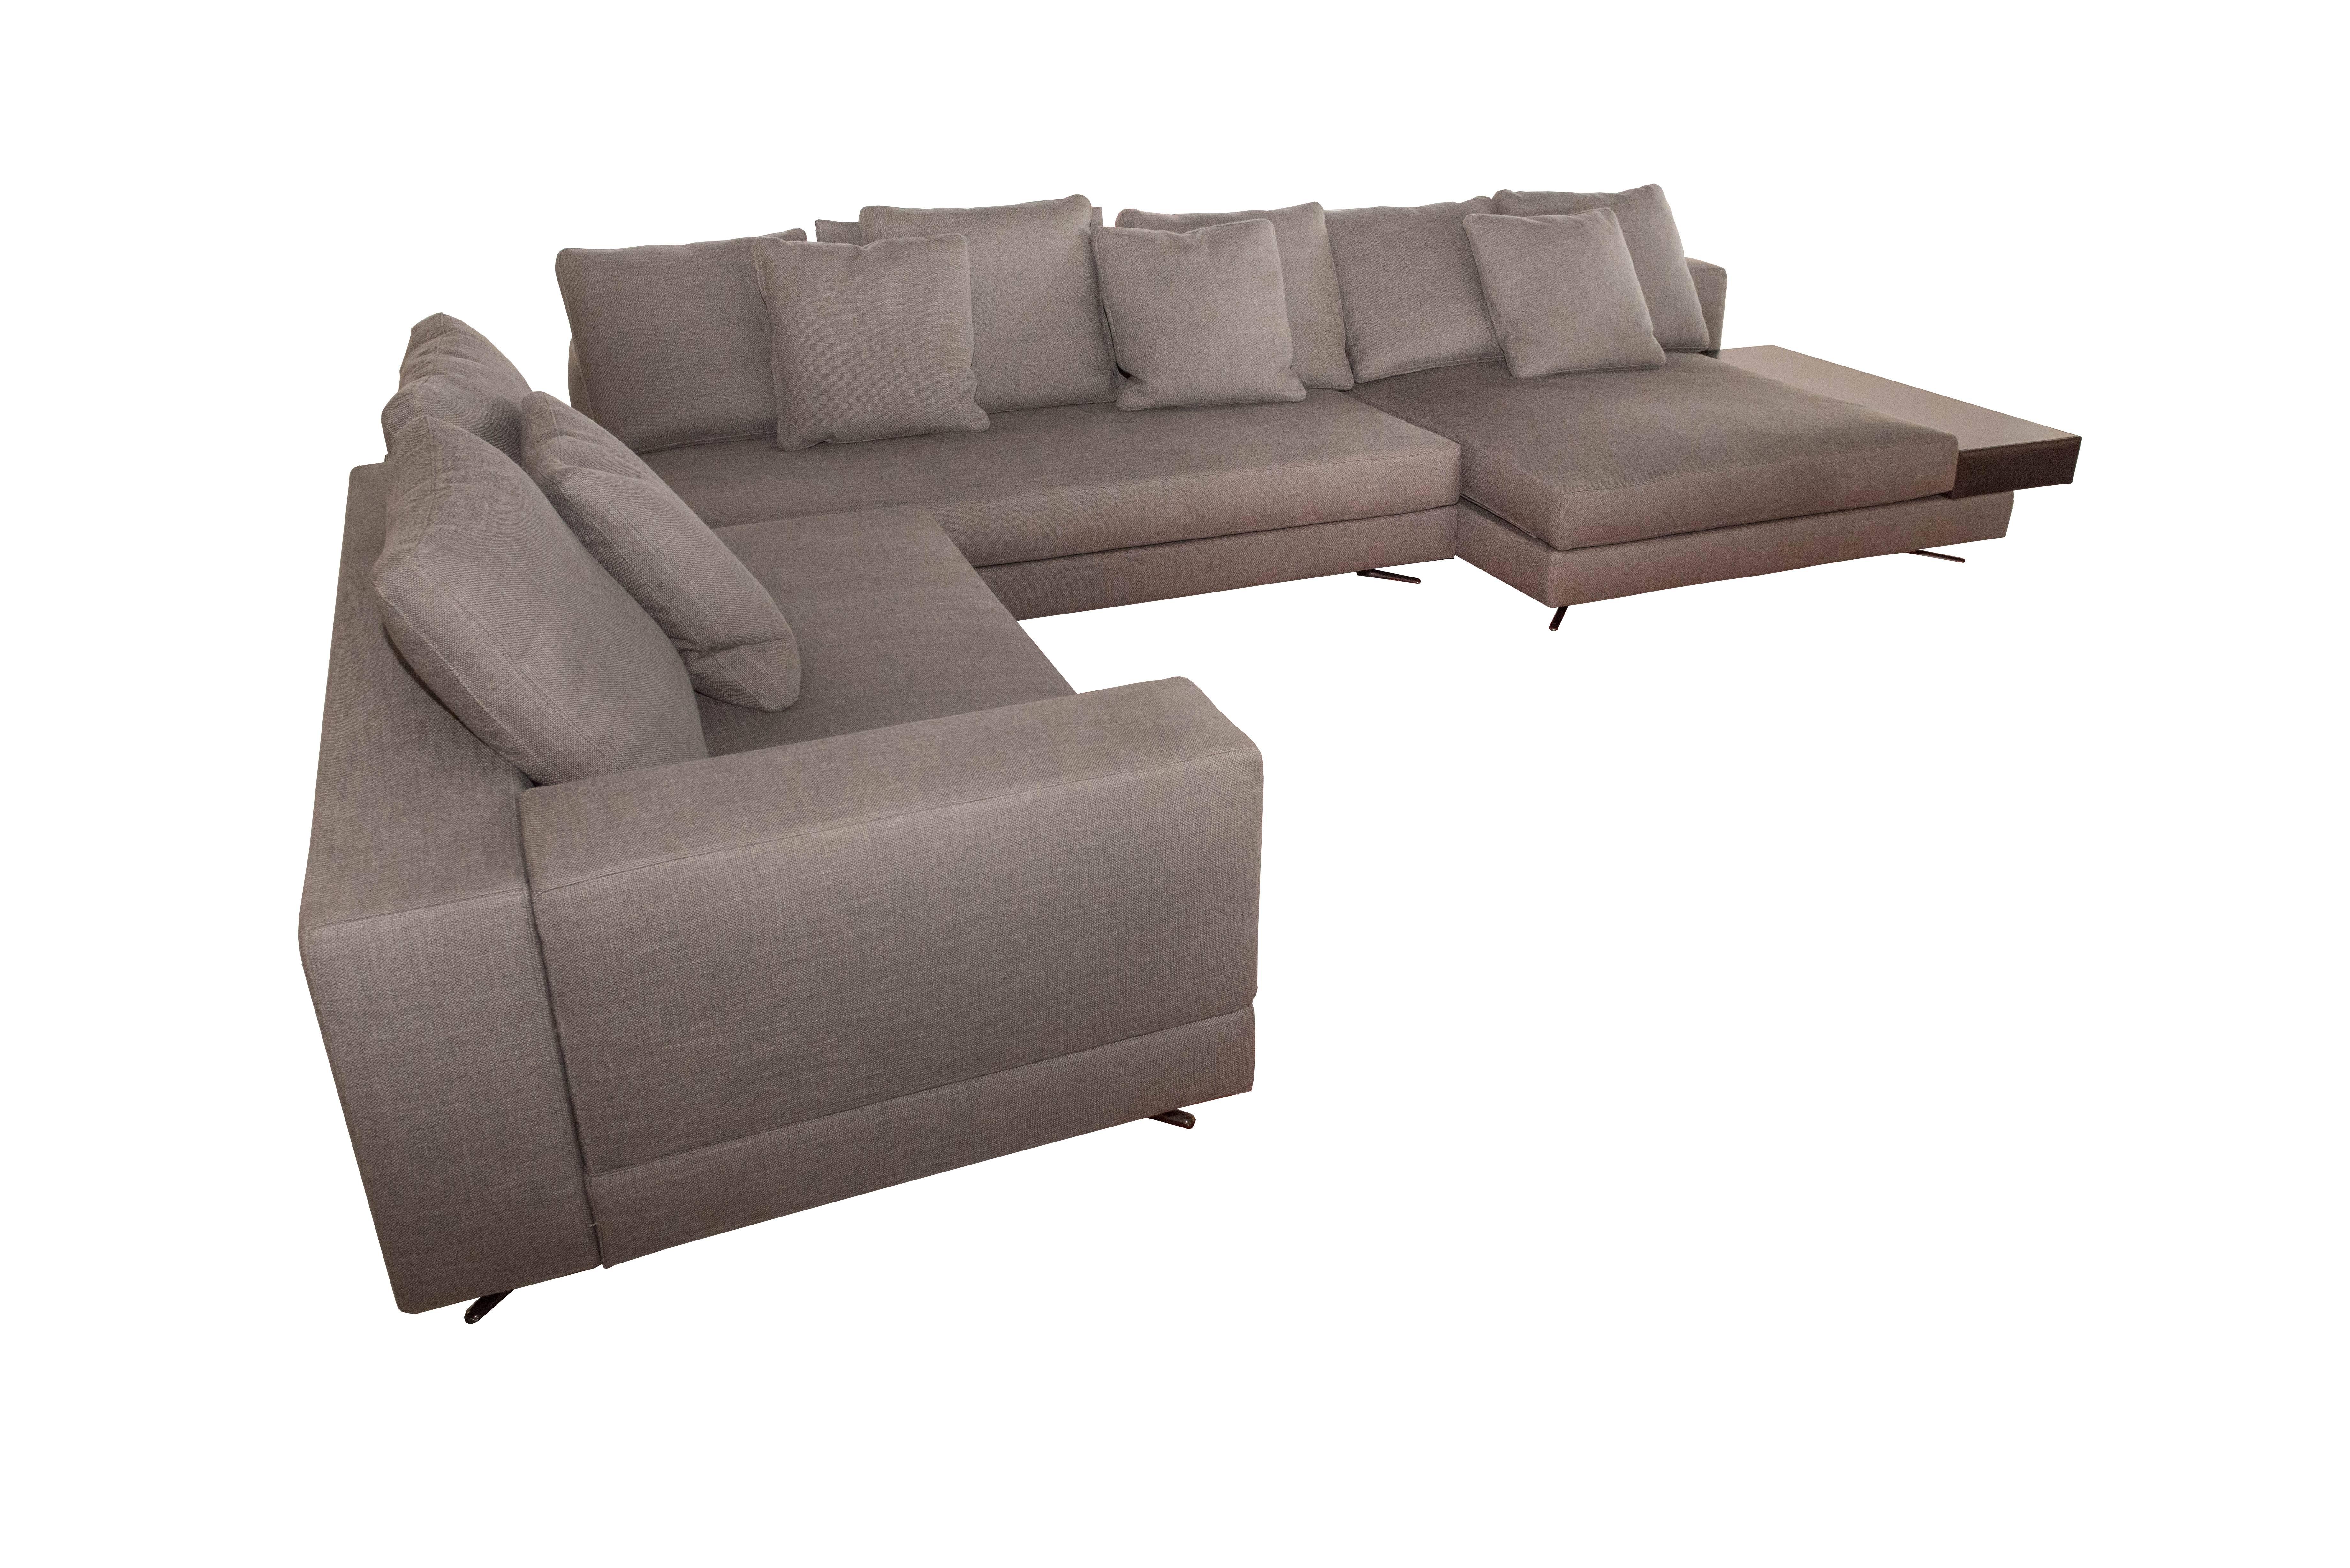 Structure: Multi-ply wood, seat suspension is provided by elastic straps with a high rubber content. 

Structure preparation: Variable-density resilient polyurethane foam padding. The sofa armrests and backrests are covered with a channeled goose